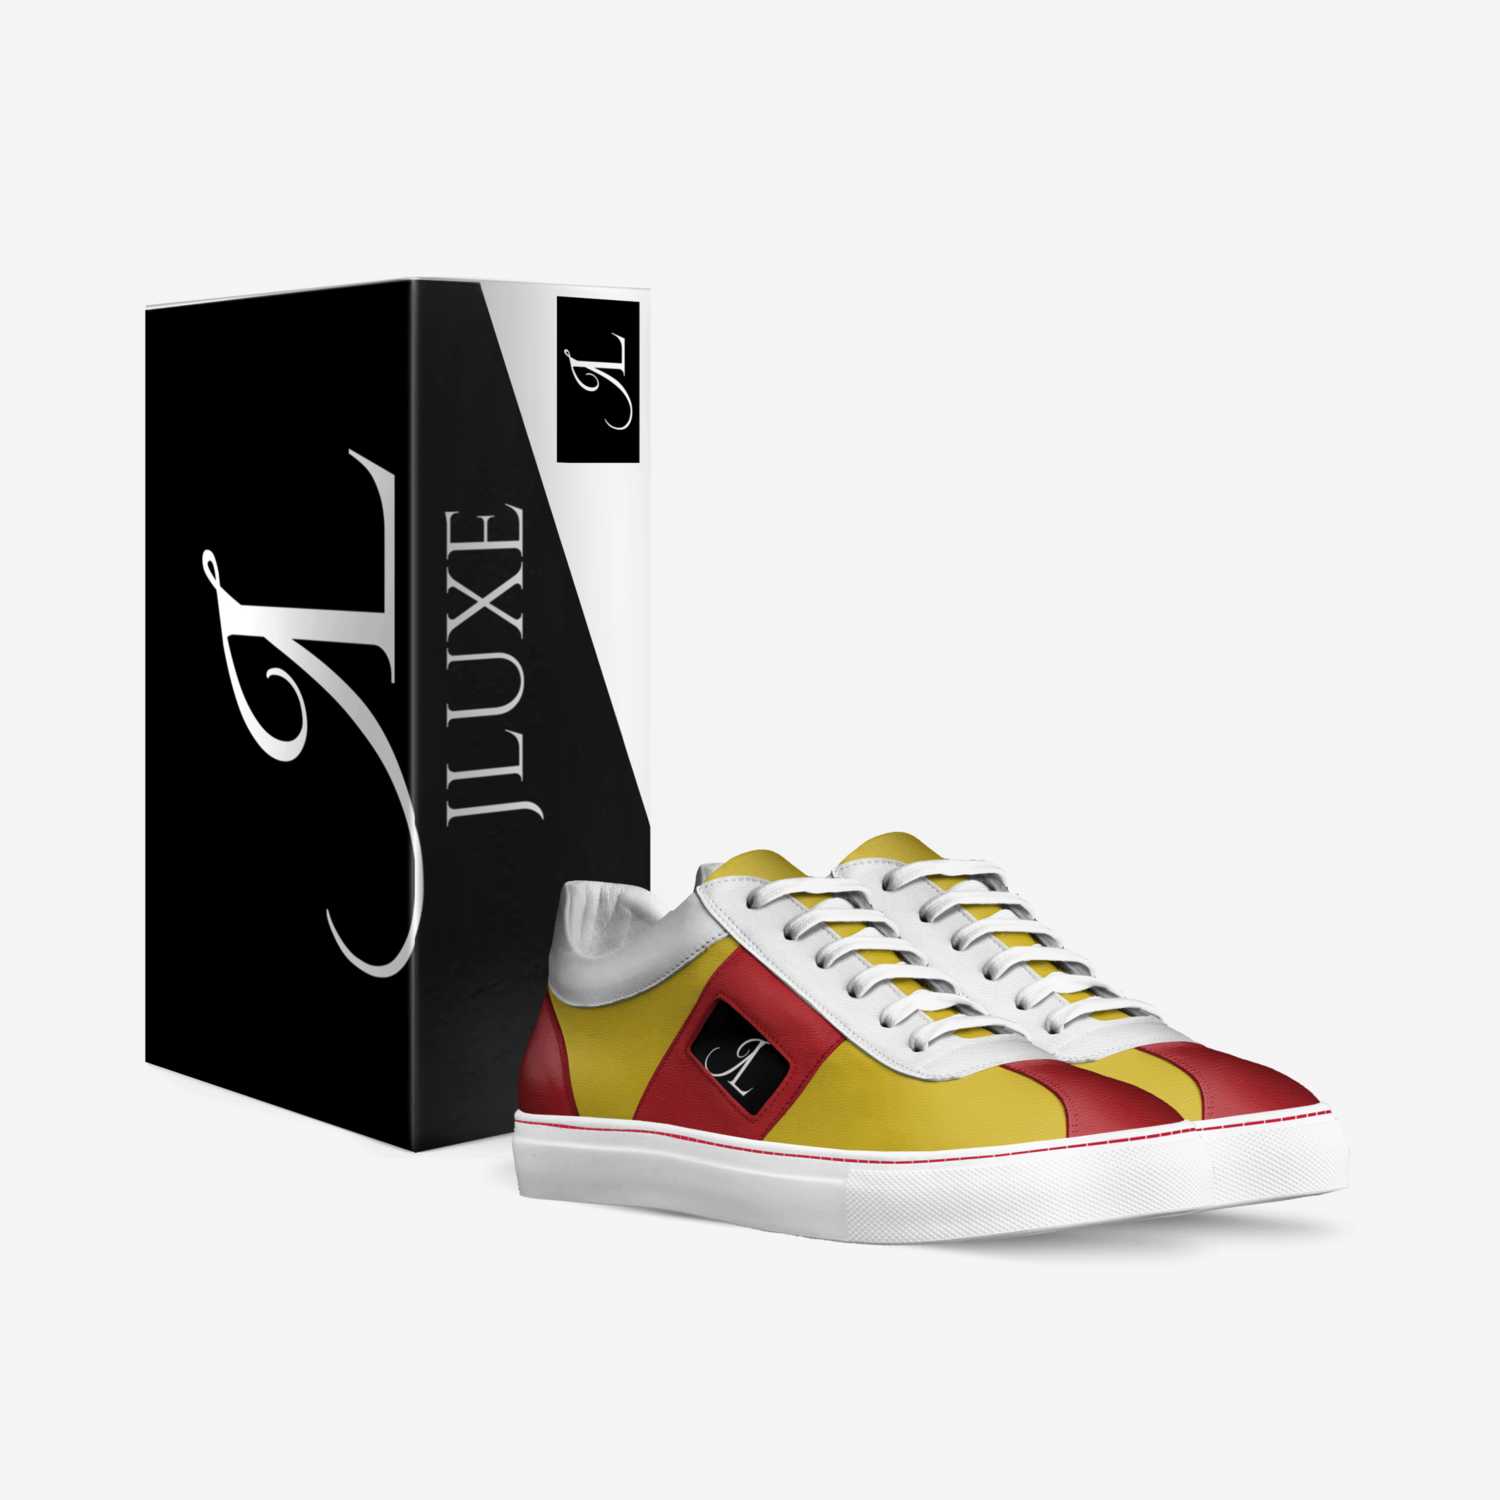 JLUXE1 custom made in Italy shoes by James Luckes | Box view